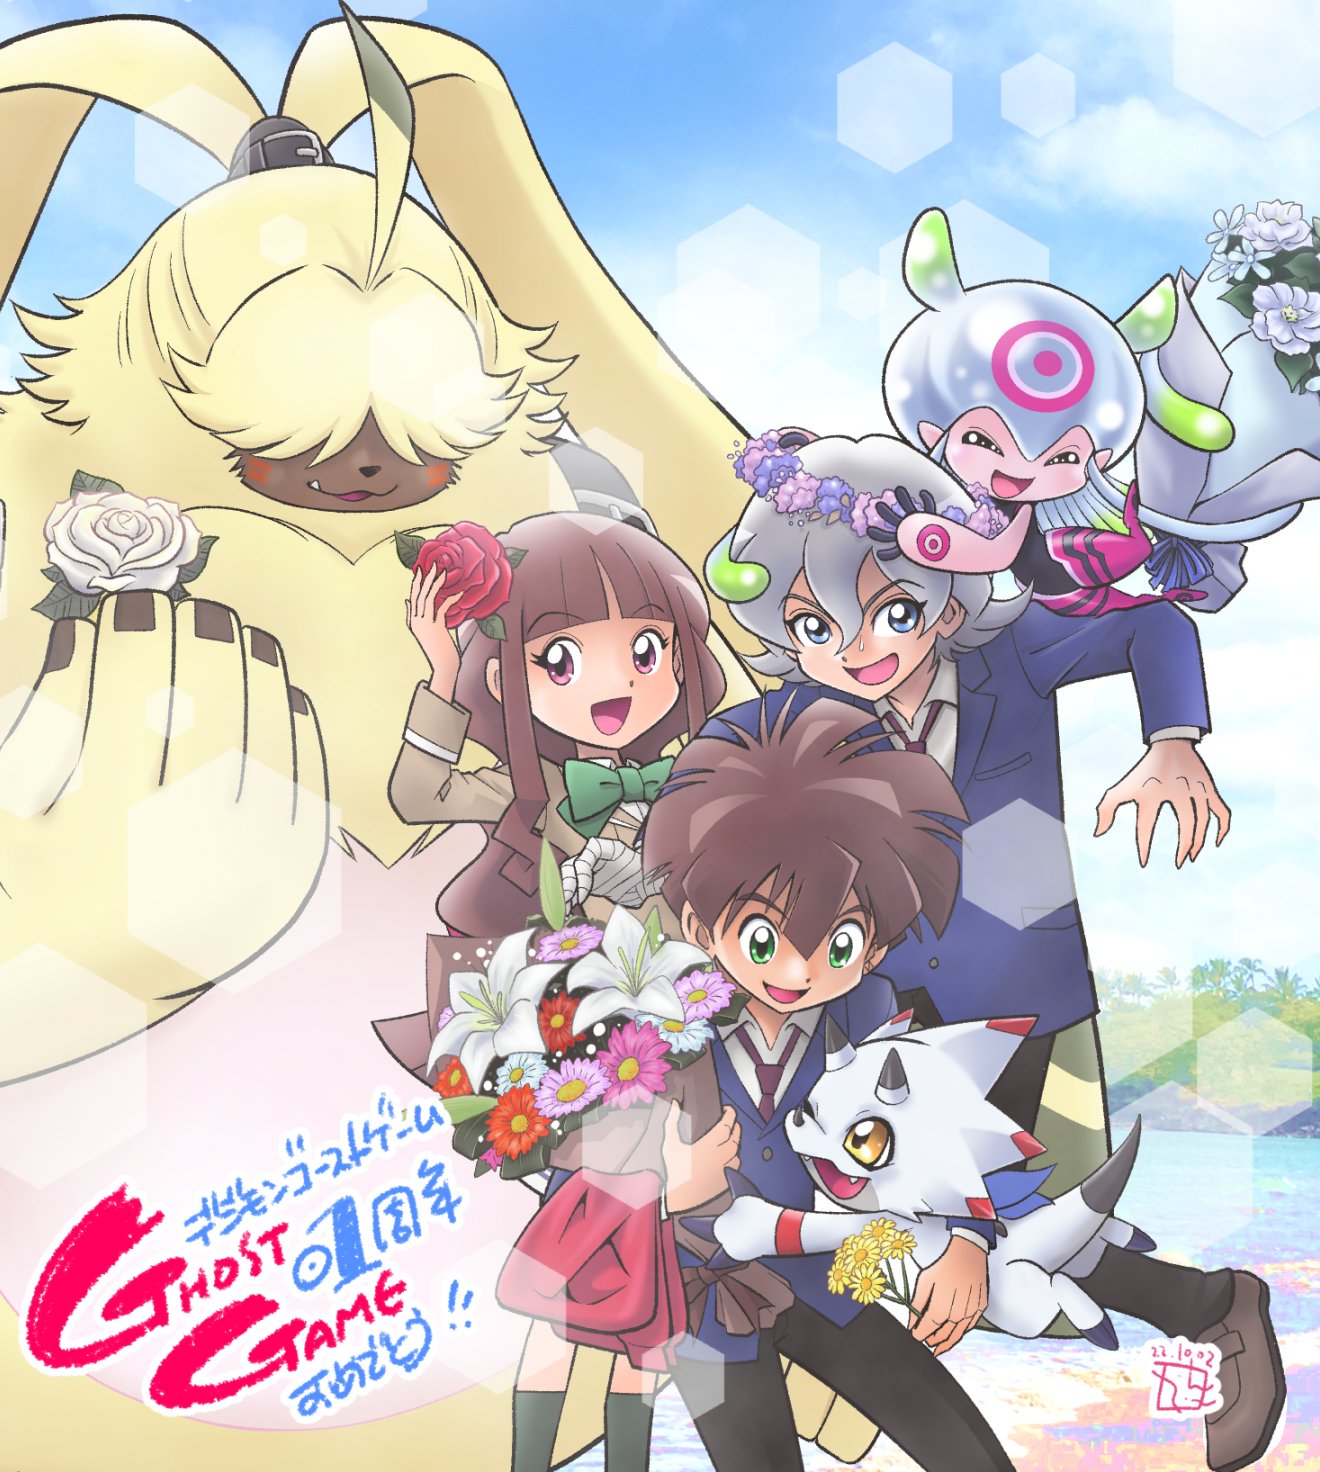 1st Anniversary of Digimon Ghost Game! | With the Will // Digimon Forums